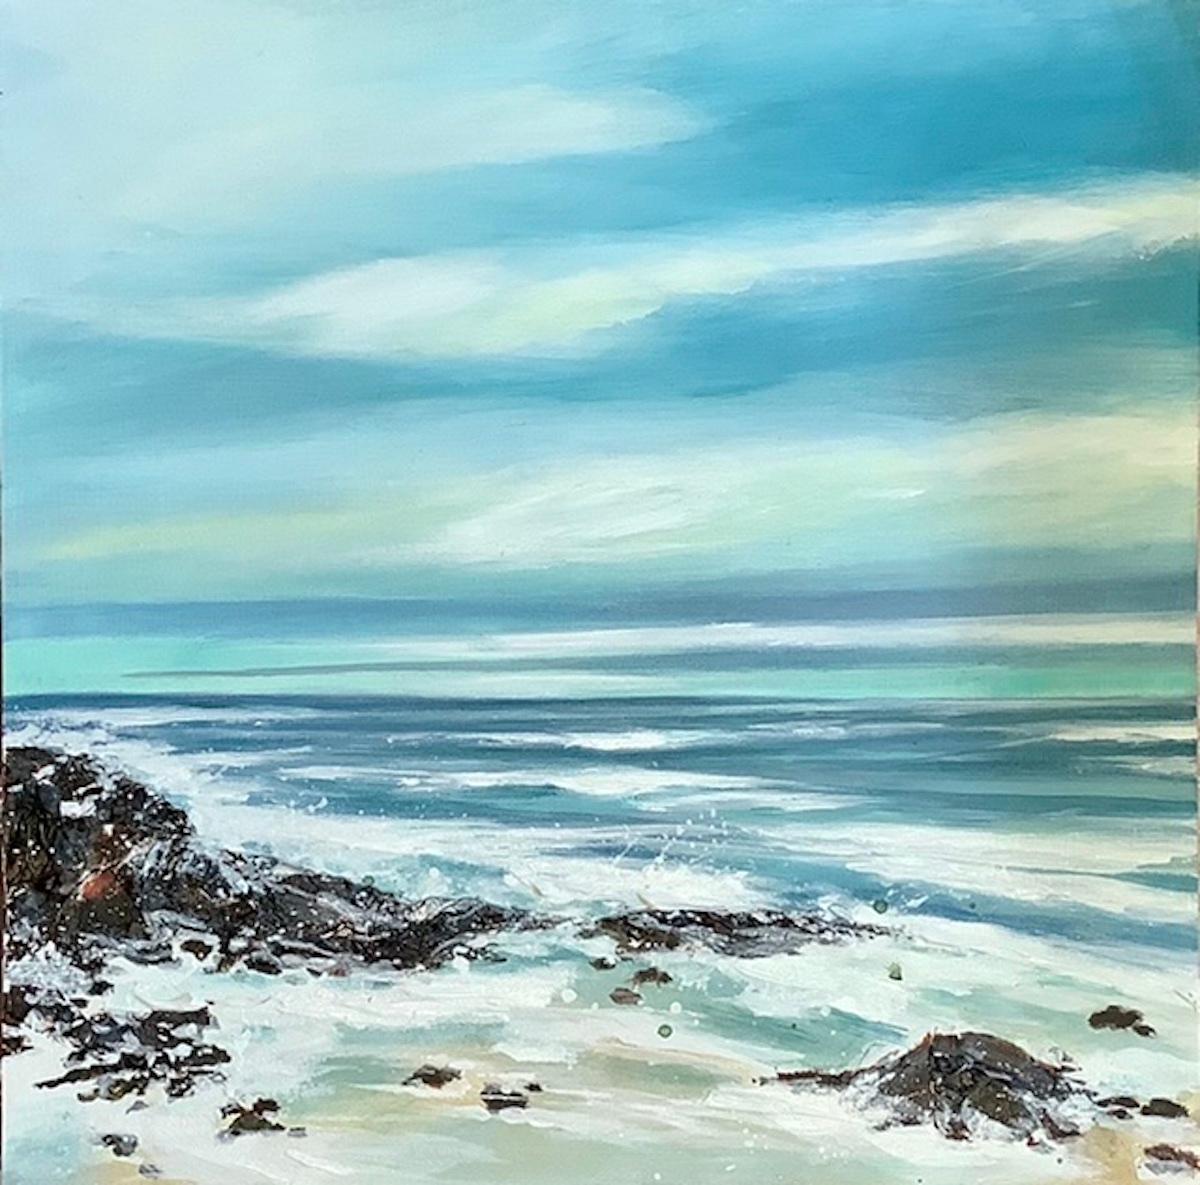 Adele Riley  Landscape Painting - Priests Cove 1 by Adele Riley, contemporary art, original painting, seascape art